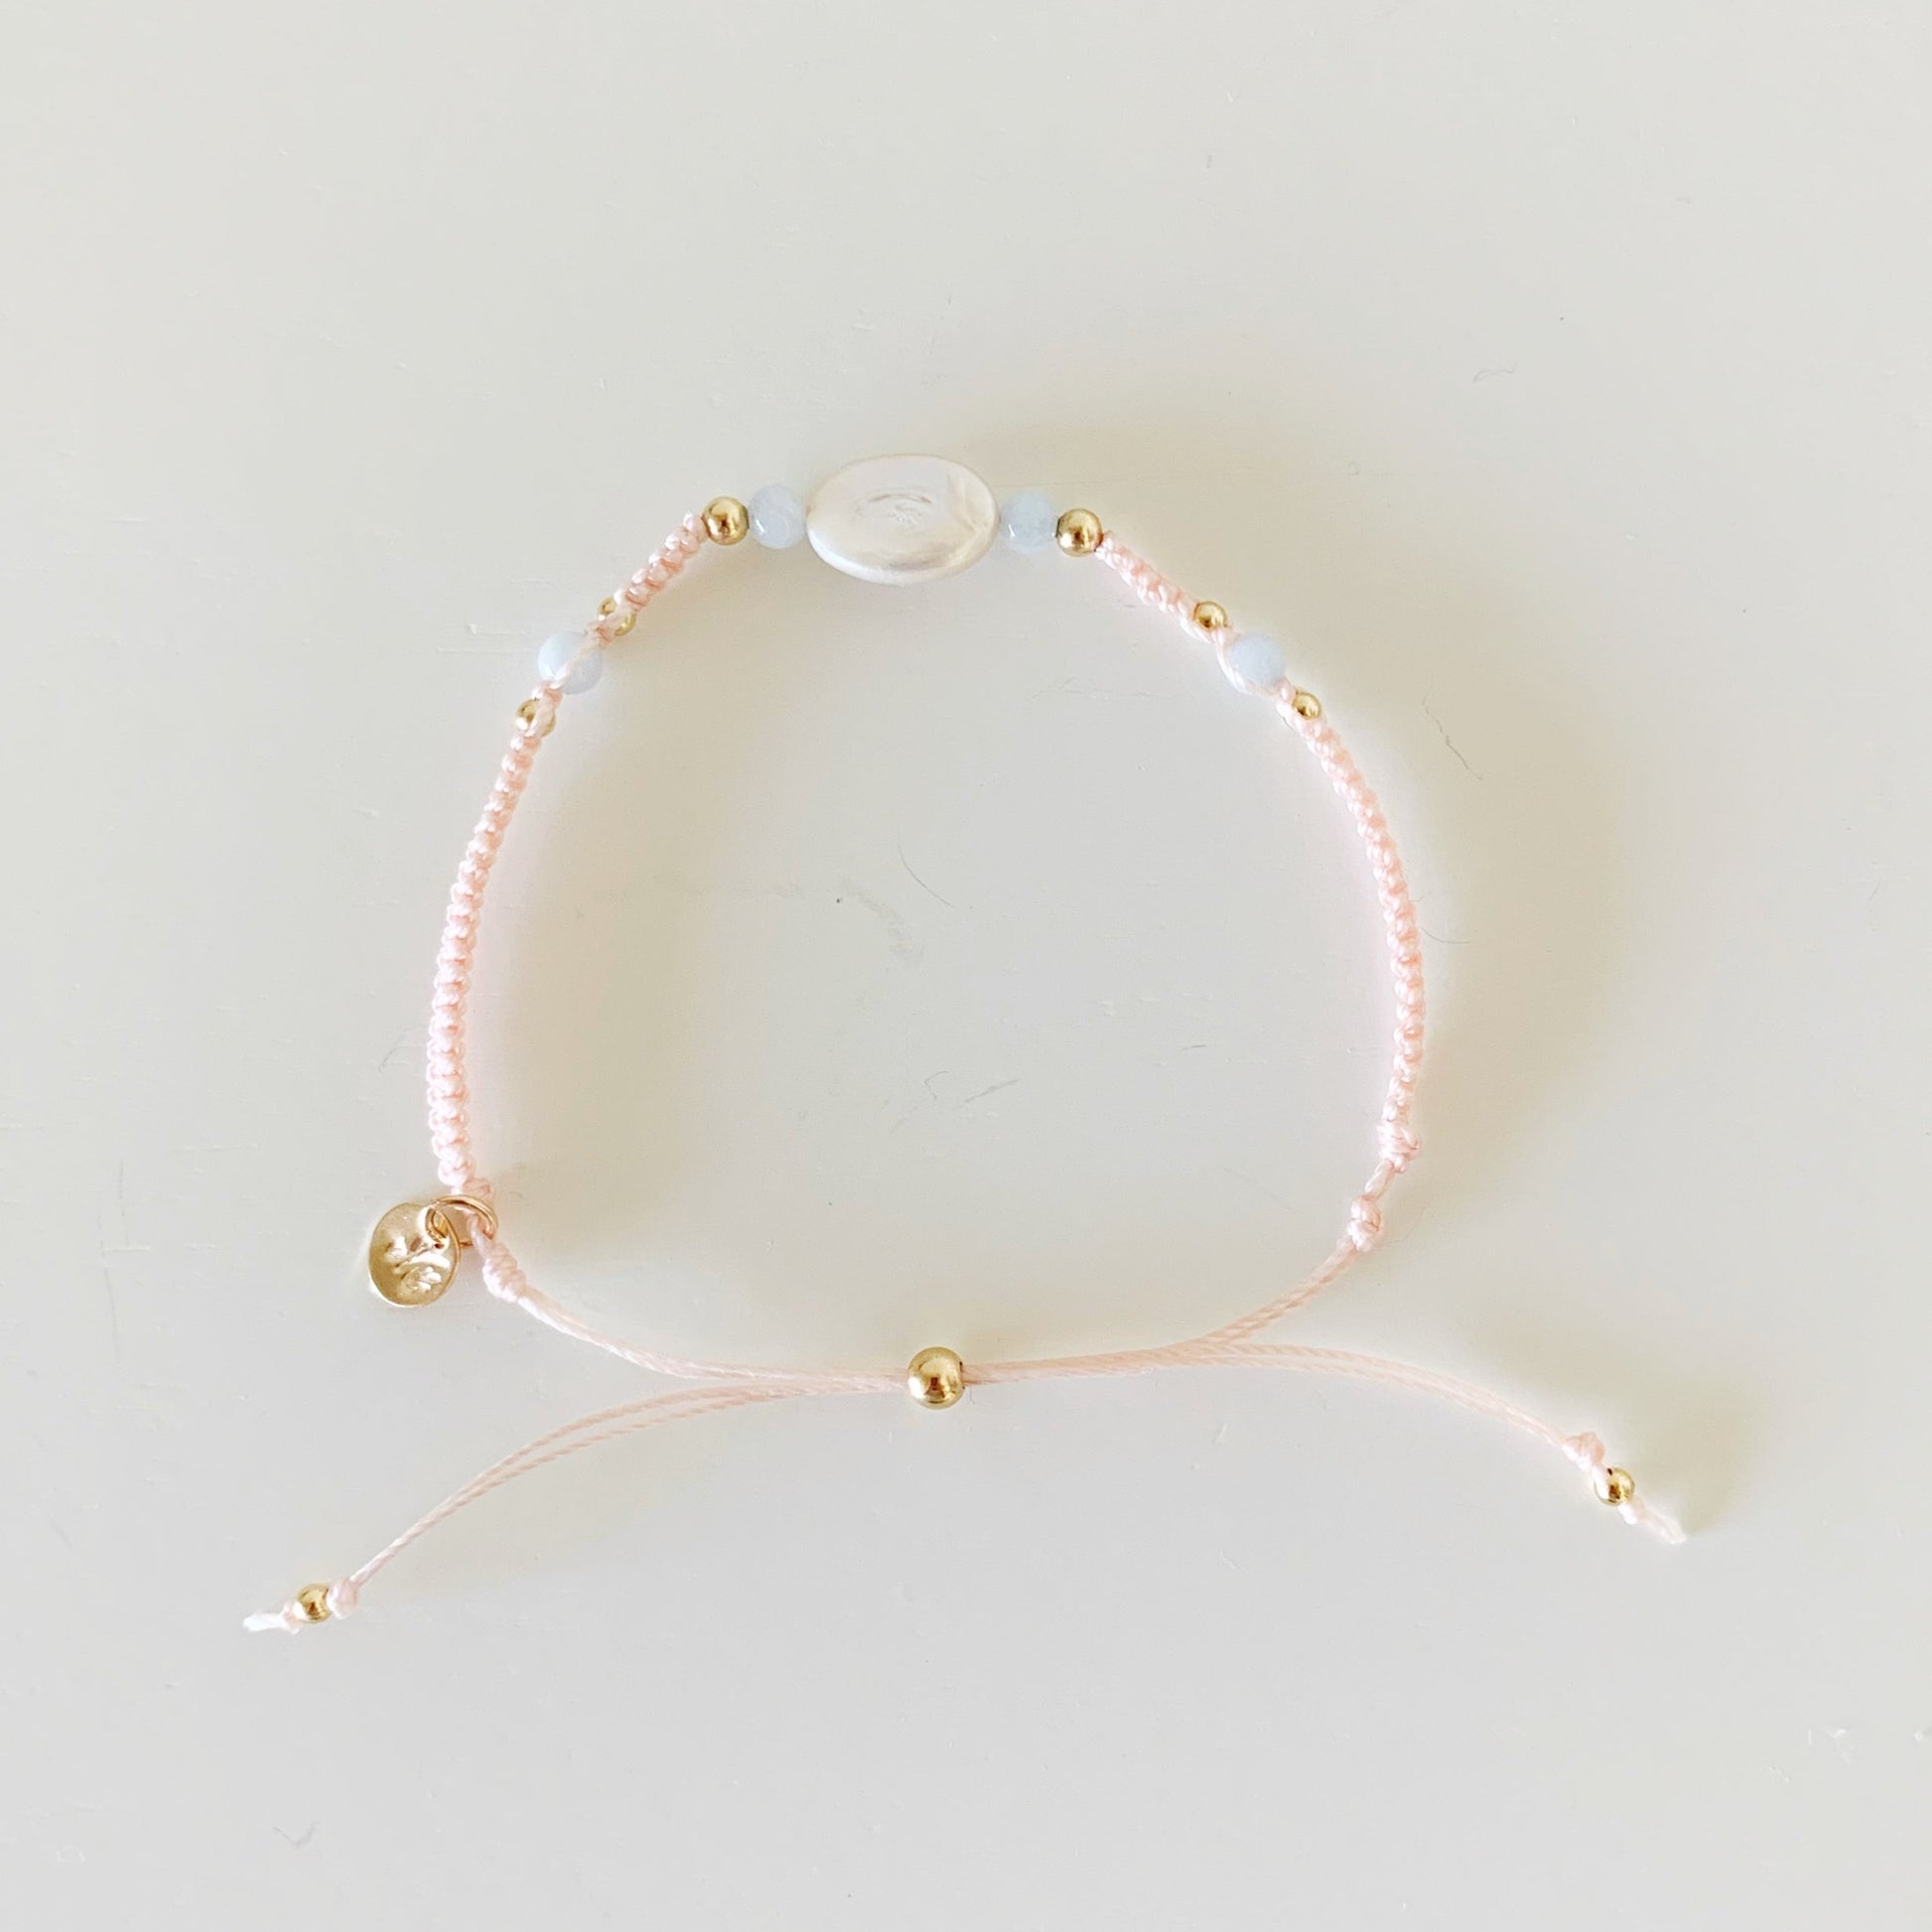 the happy as a clam bracelet by mermaids and madeleines is an adjustable macrame style bracelet created with light pastel blush cord with a freshwater oval pearl at the center with 4mm round aquamarine on either side. this bracelet is photographed from the top in full view on a white surface